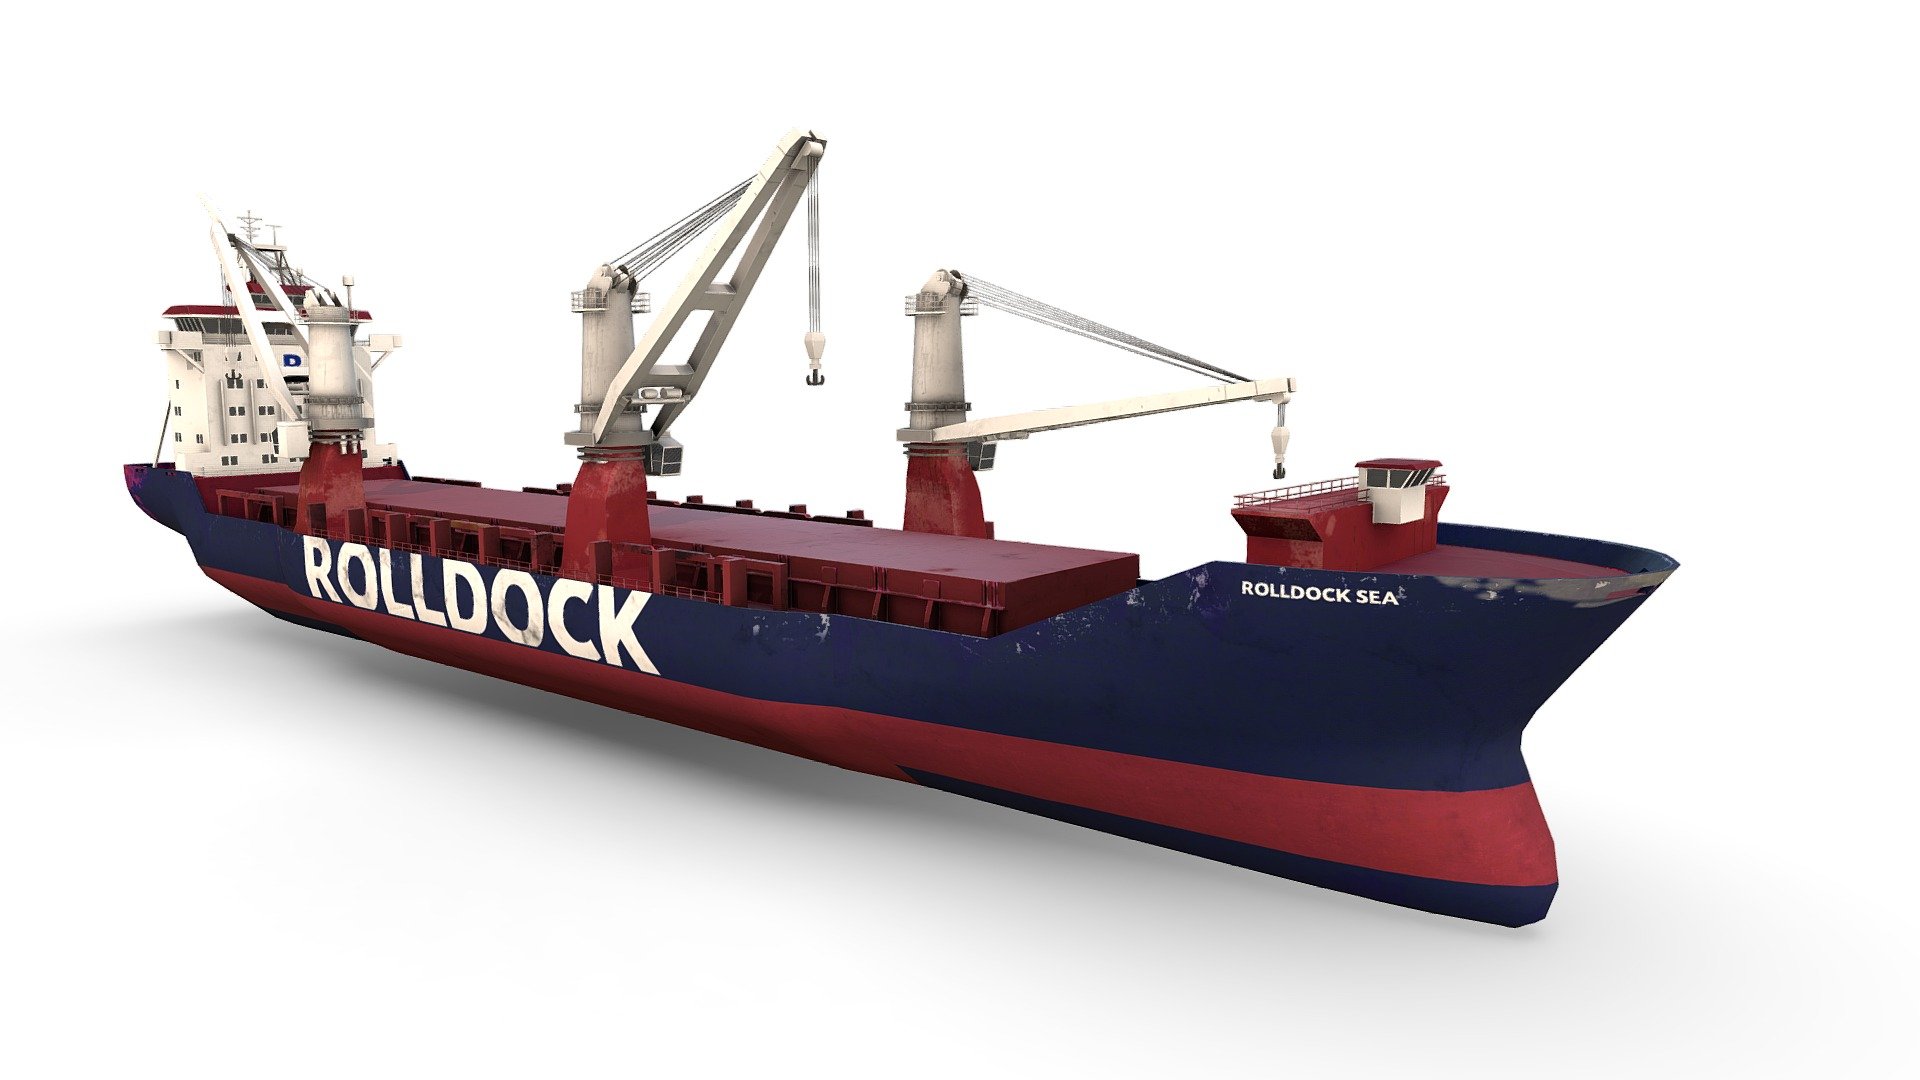 Heavy Lift Multi Purpose Cargo Ship Rolldock

Additional file contains: 8 x textures in native 4K: 2 x base diffuse and 2 x specular diffuse (with gently baked in AO), 2 x gloss, 2 x norm, 1 x 1K base for windows glass. Contained are also the file formats .fbx, .obj, .3ds and .max (native 2014) 3d model